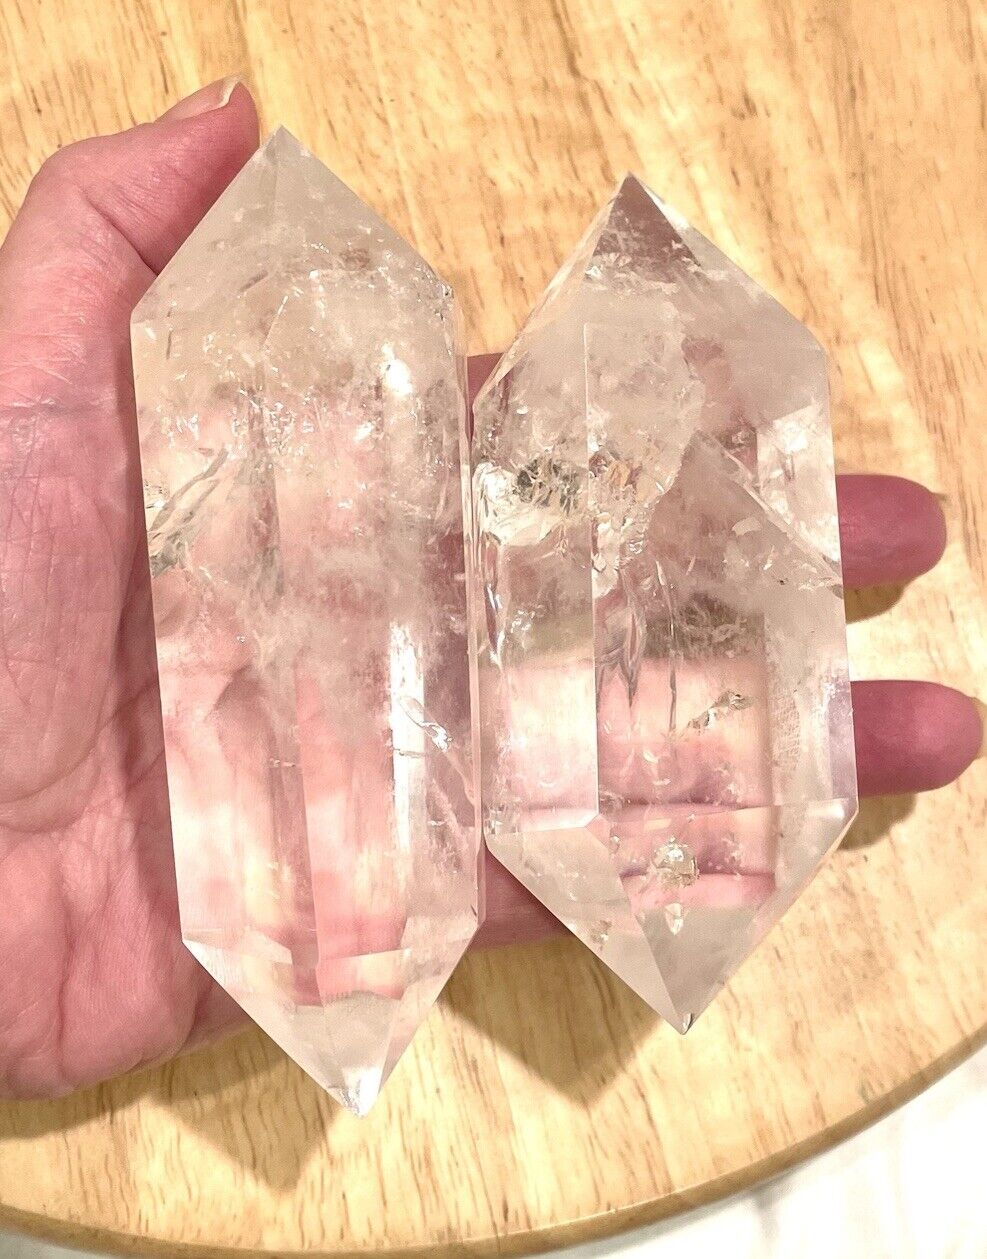 TWO AAA 100% NATURAL CLEAR QUARTZ CRYSTAL WAND POINT Healing New 5” Inches Long